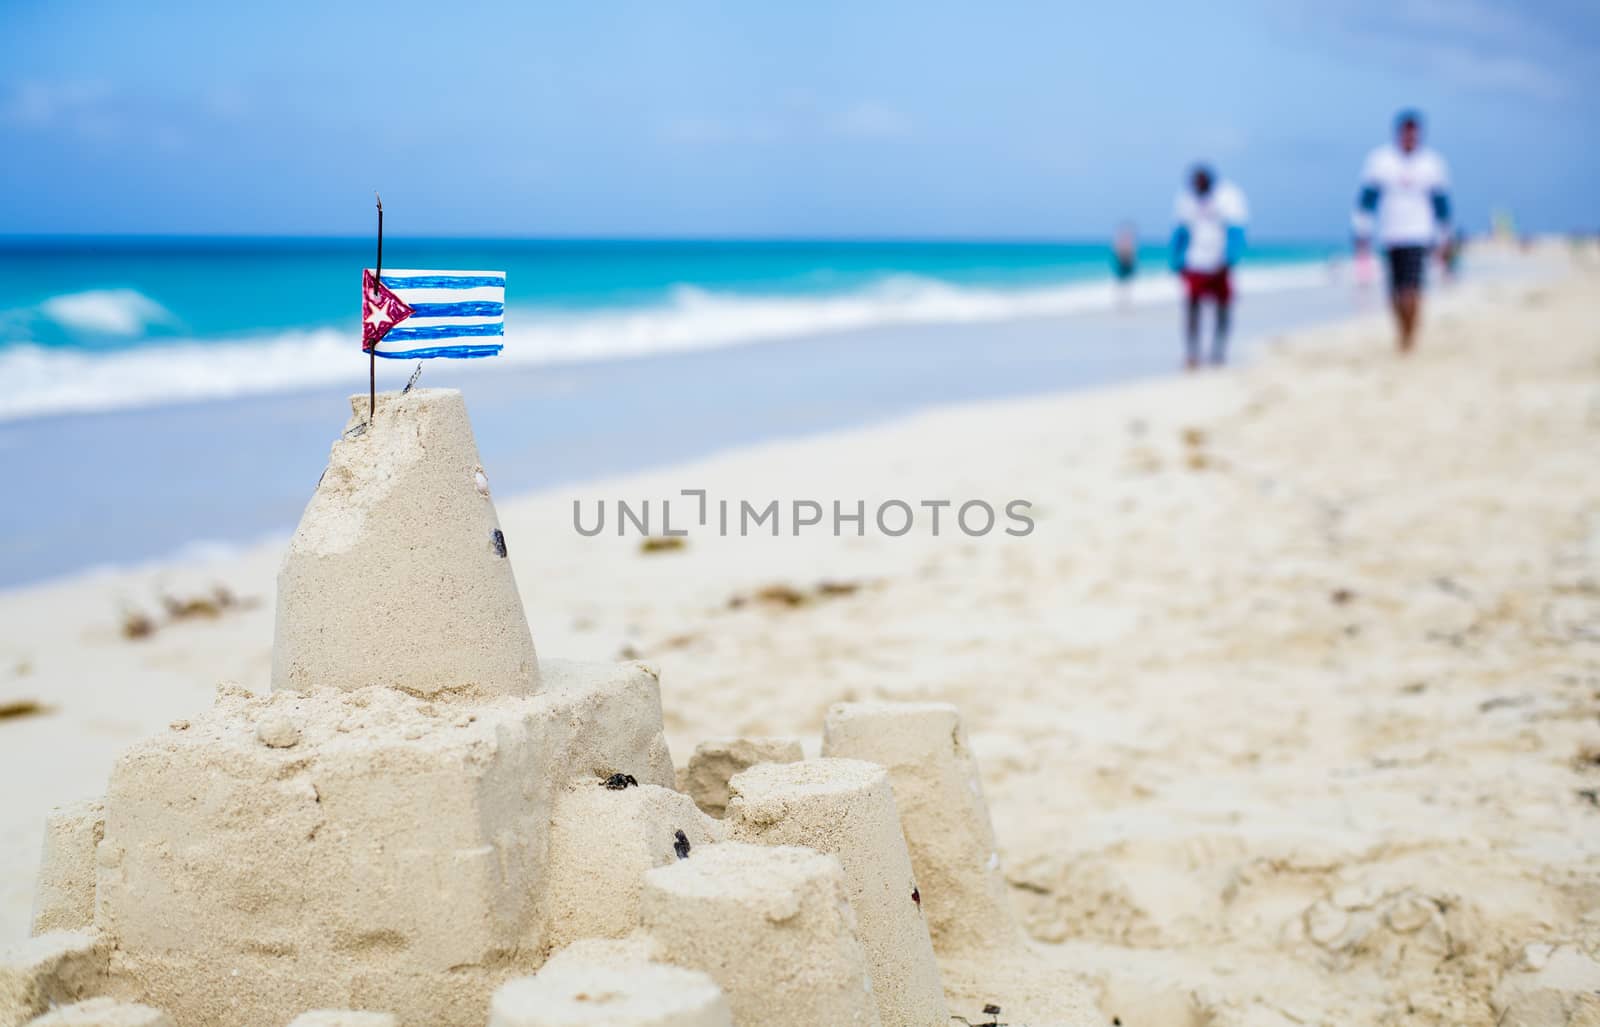 Cuban Sandcastle with the country Flag in Cuba. by aetb